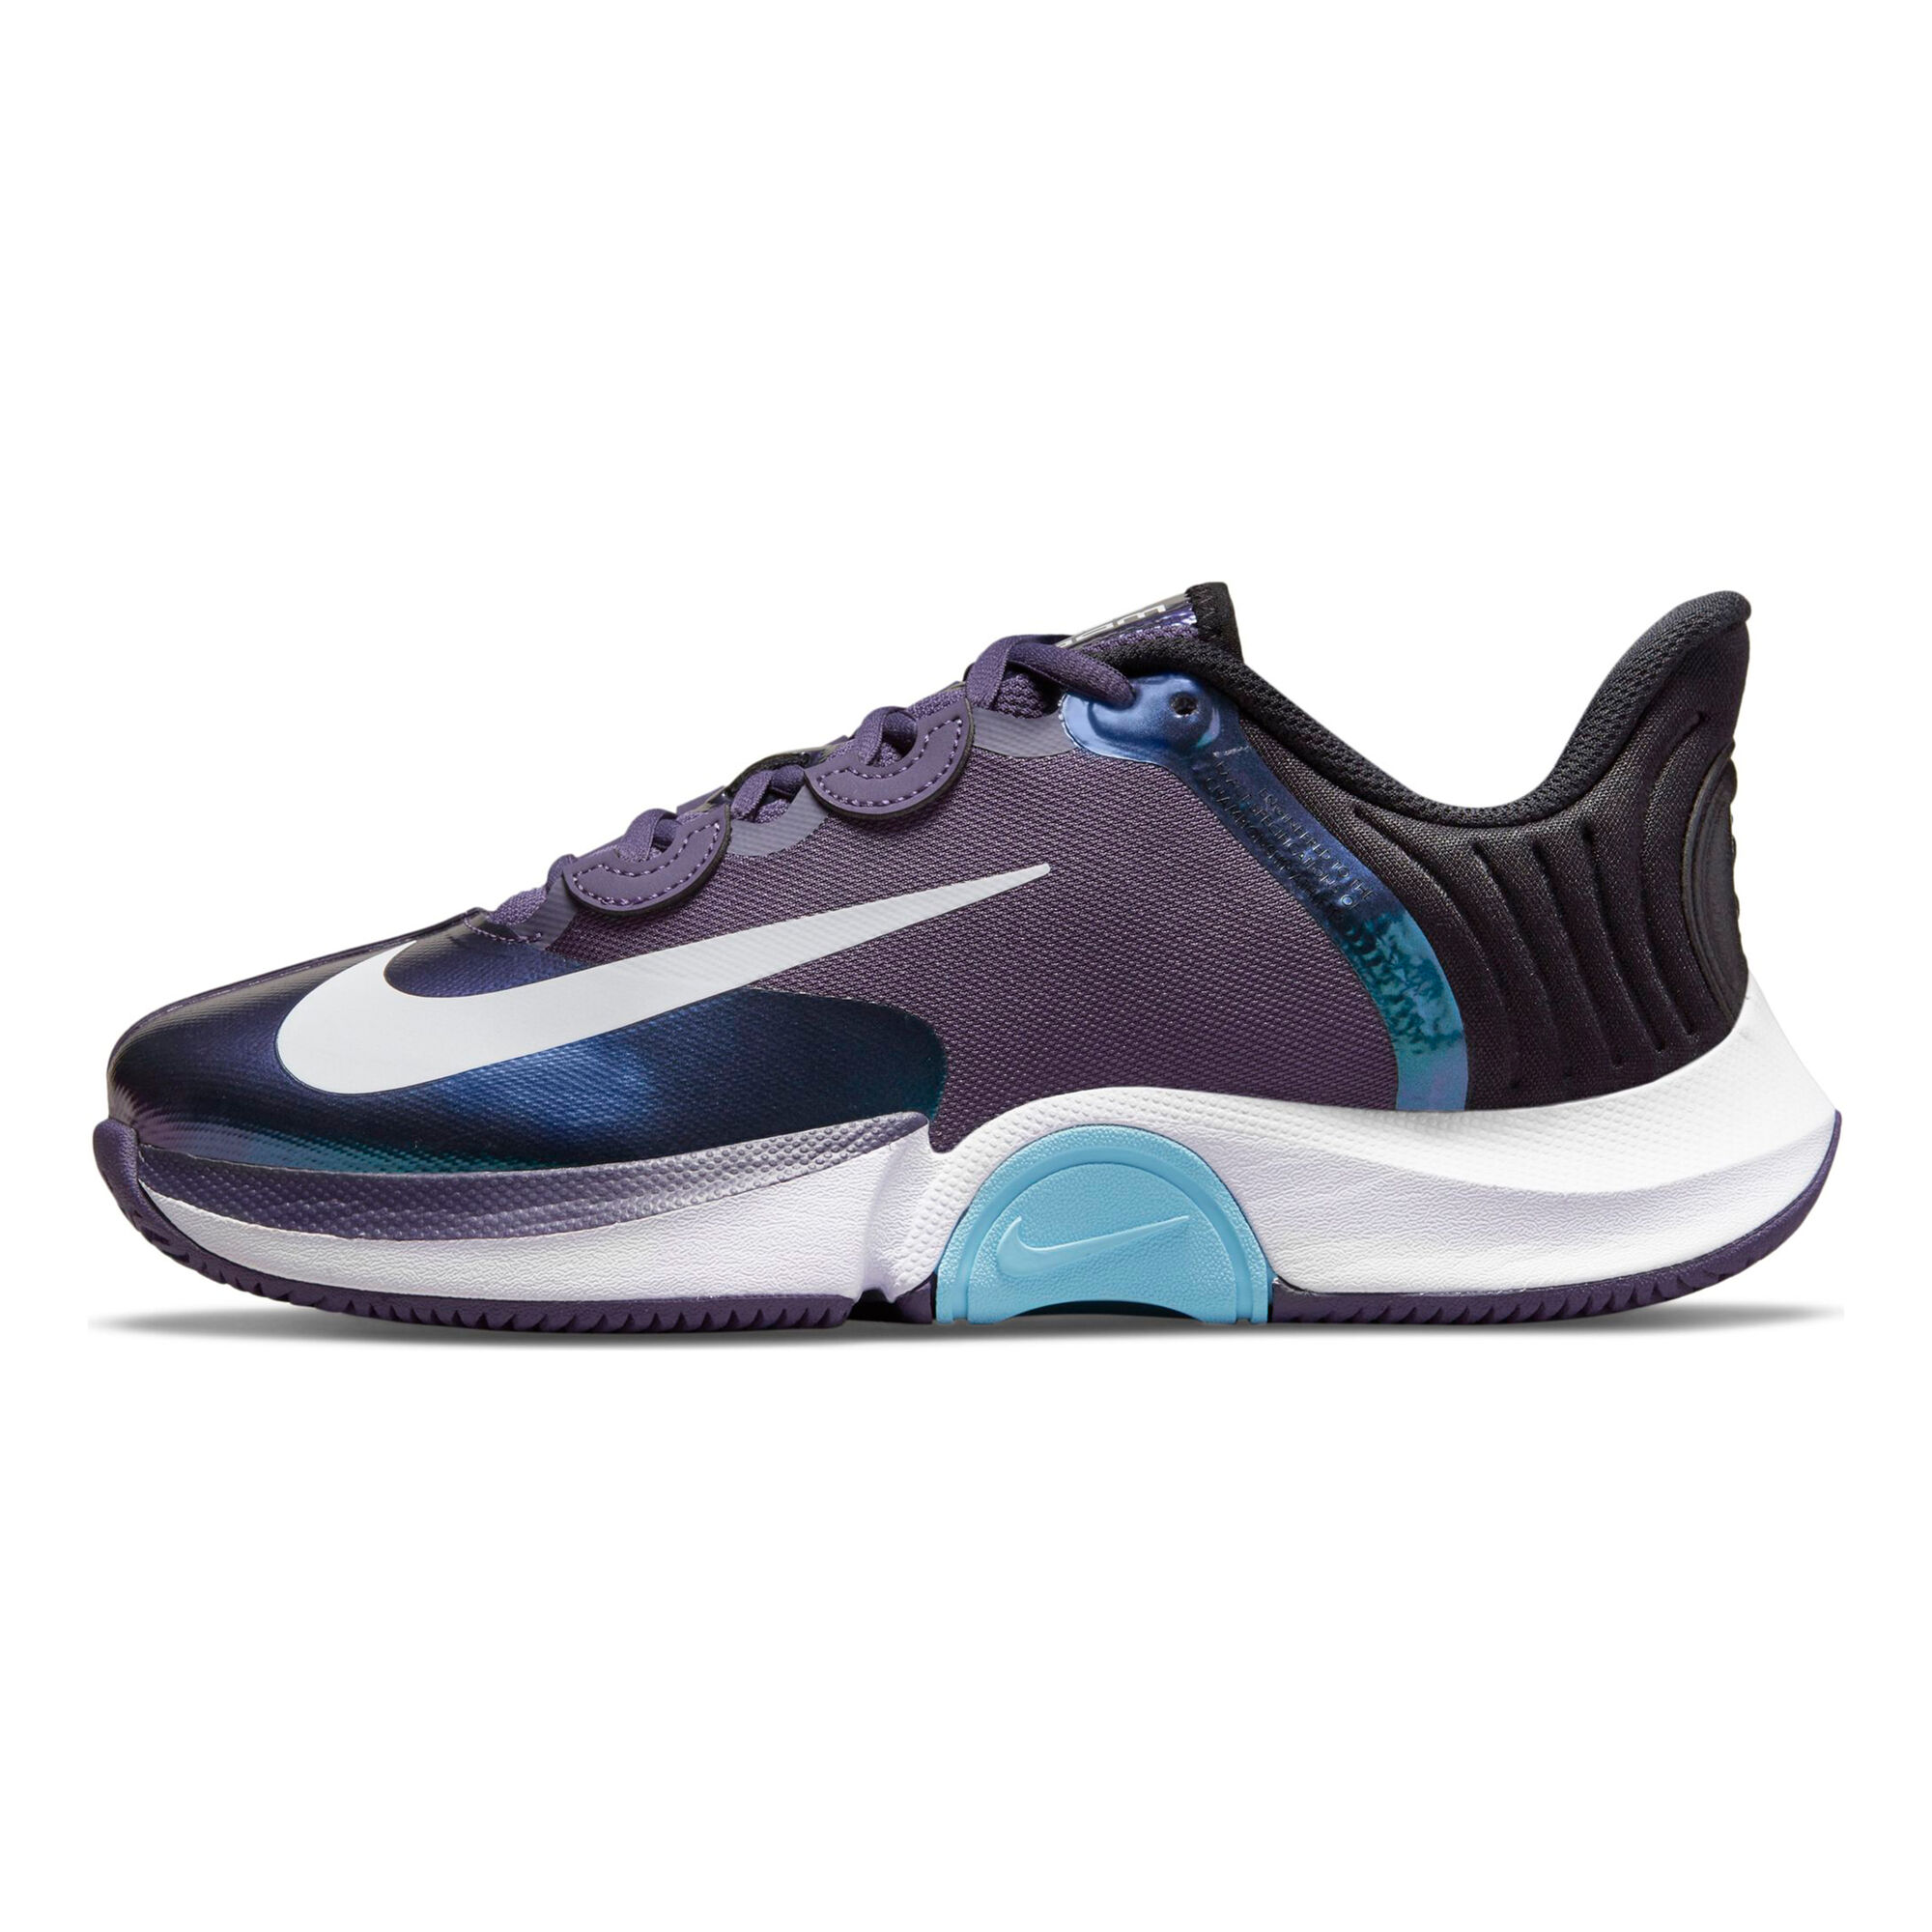 Buy Nike Air Zoom GP Turbo All Court Shoe Women Violet, Multicoloured ...